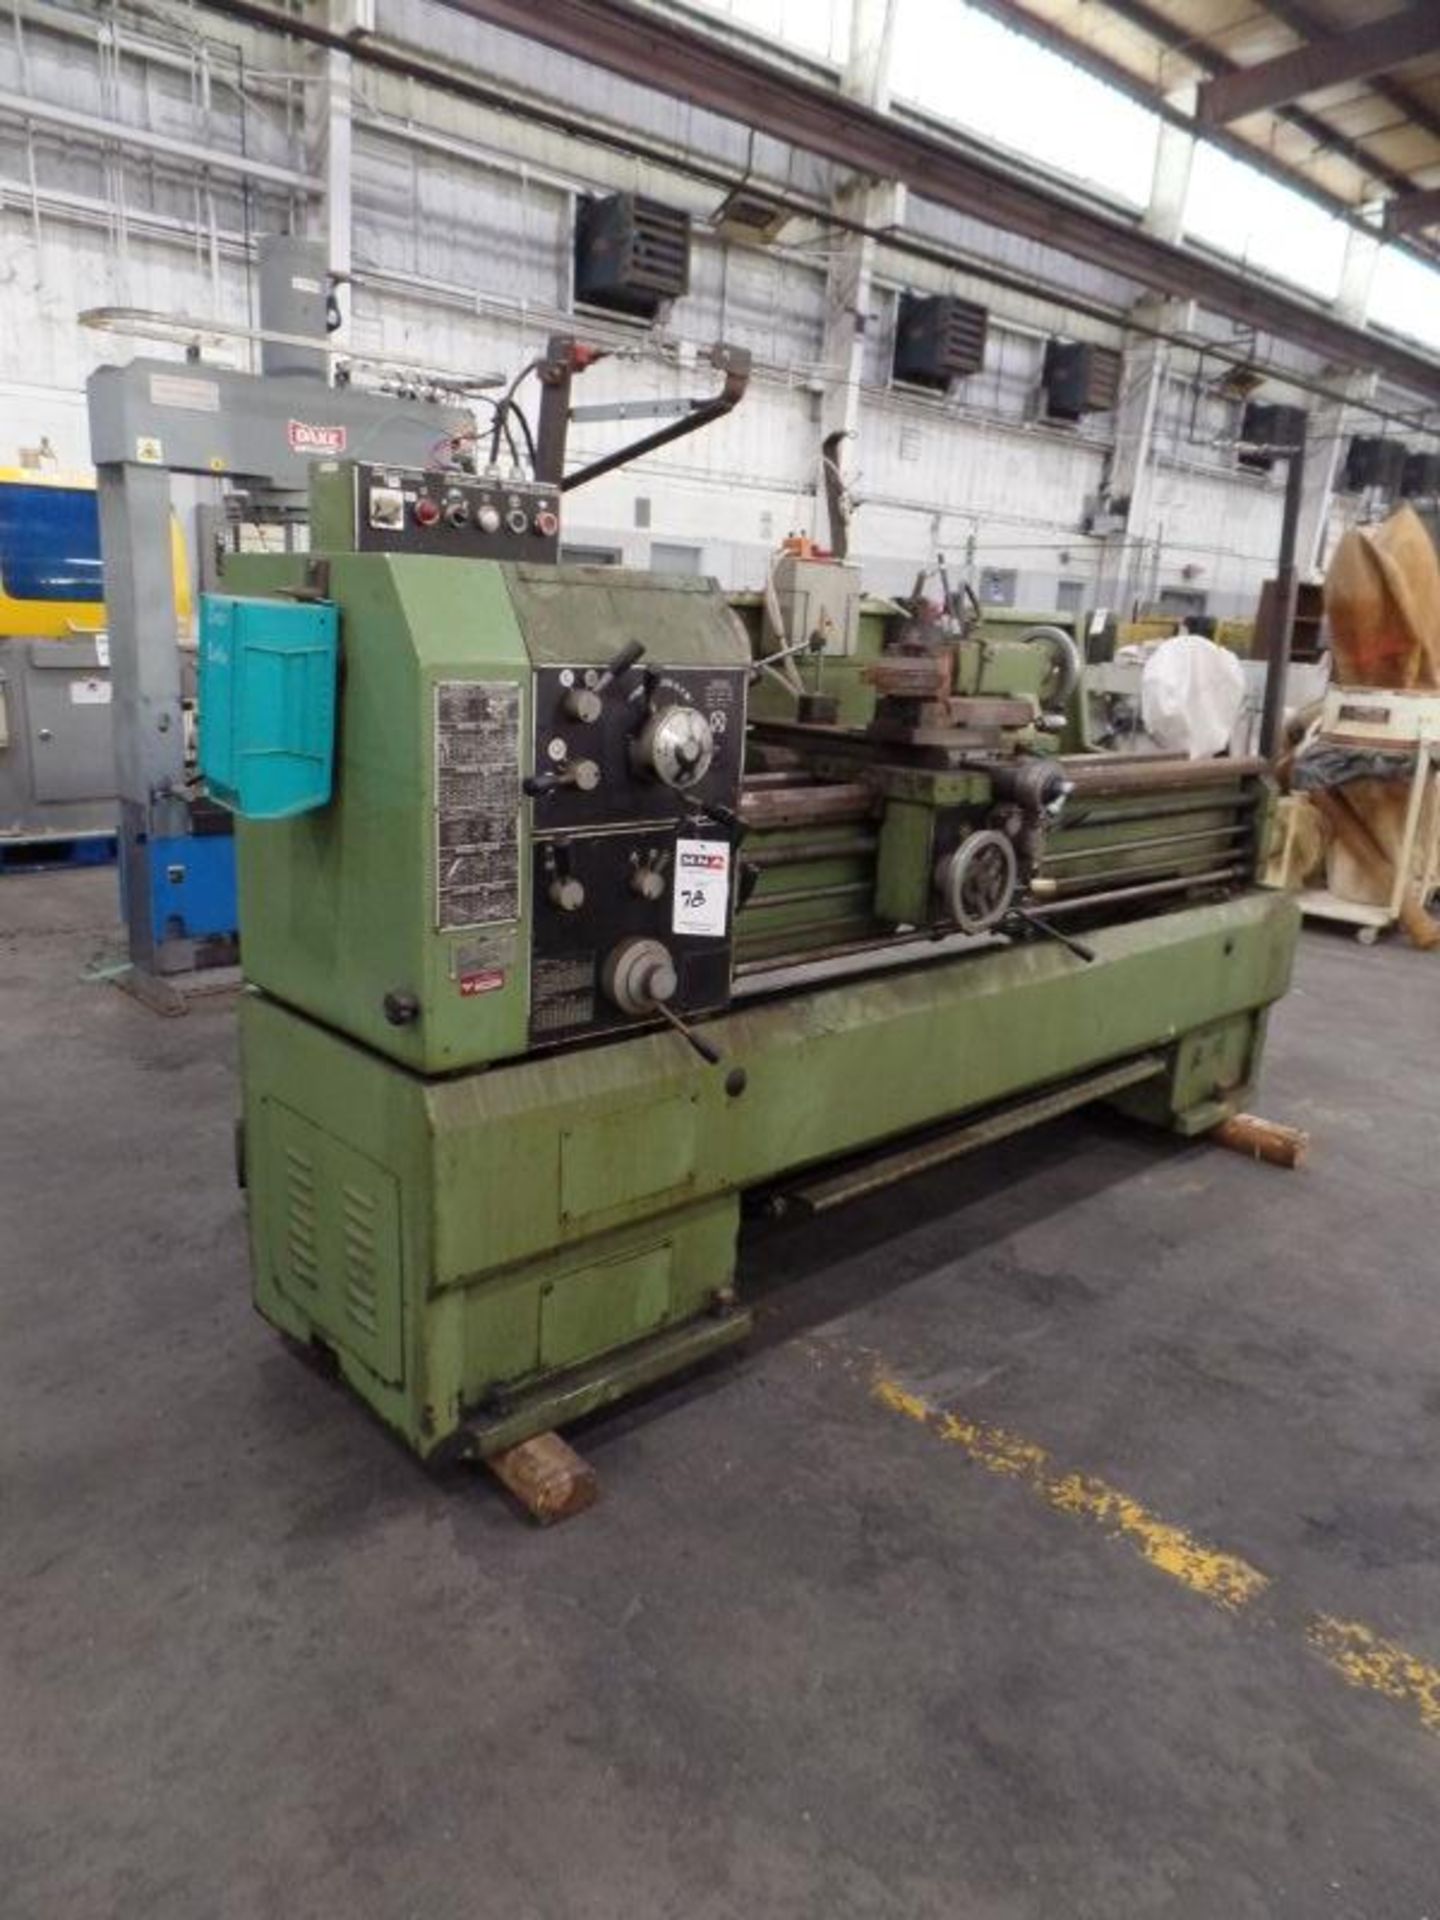 Enco 1111760 Manual Lathe, 8" Chuck, 56" Between Centers, s/n 104 - Image 3 of 10